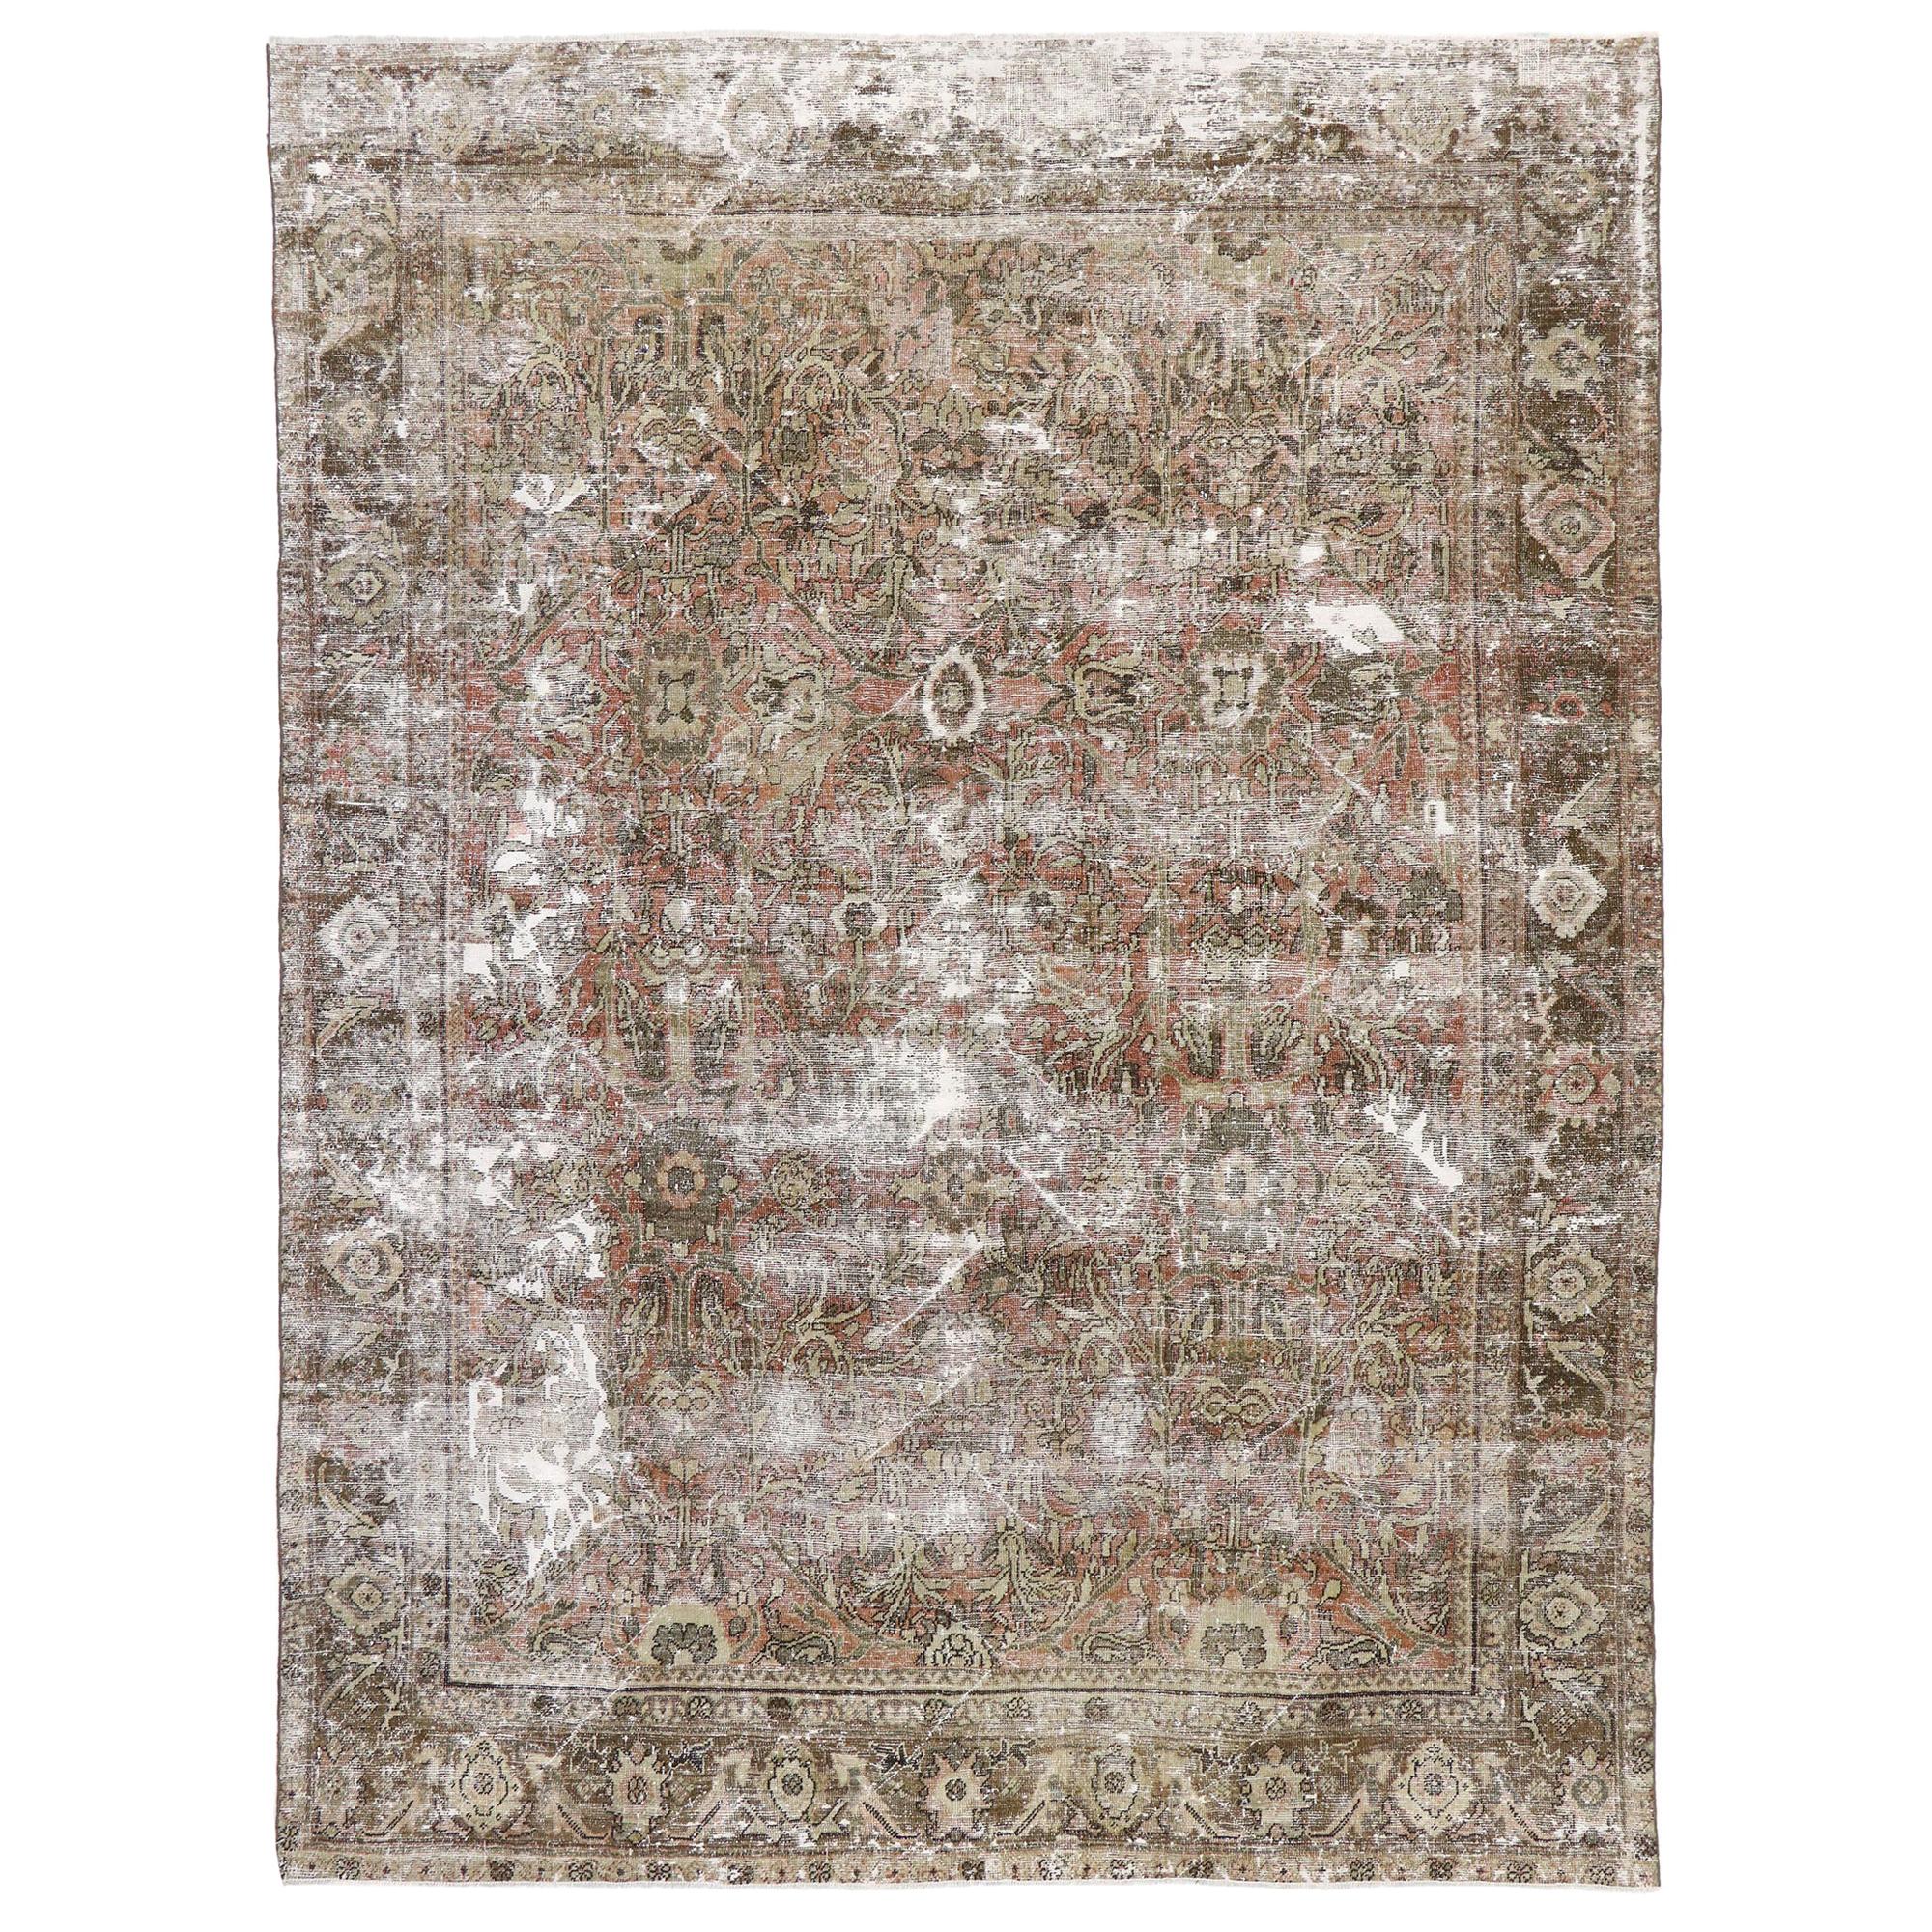 Distressed Antique Persian Mahal Rug with Modern Rustic Style